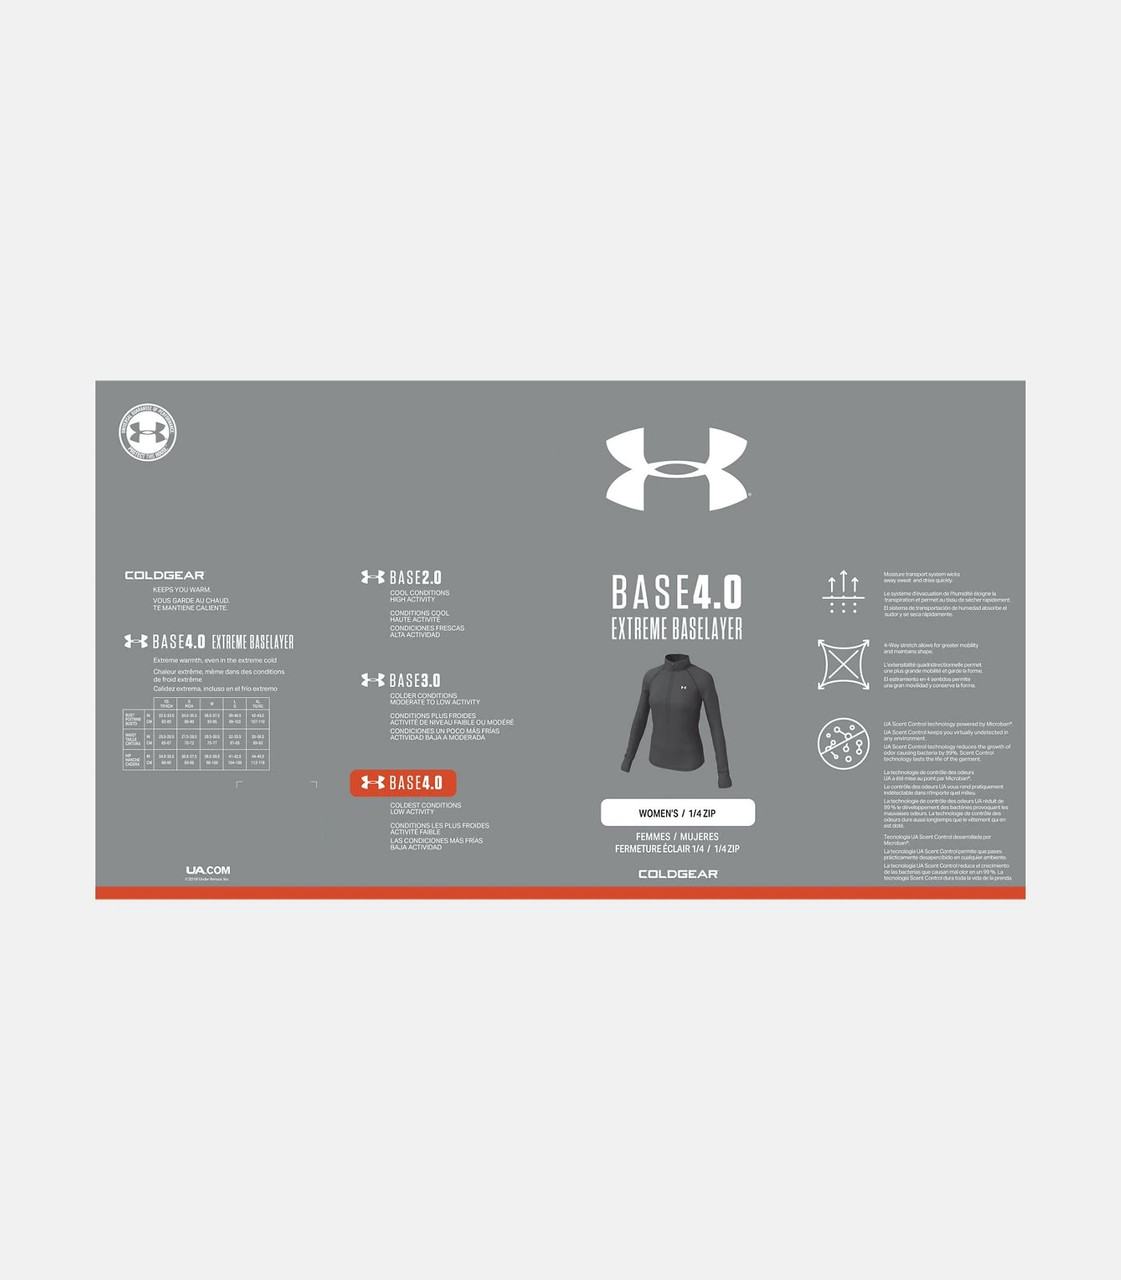 Under Armor Extreme Base Layer